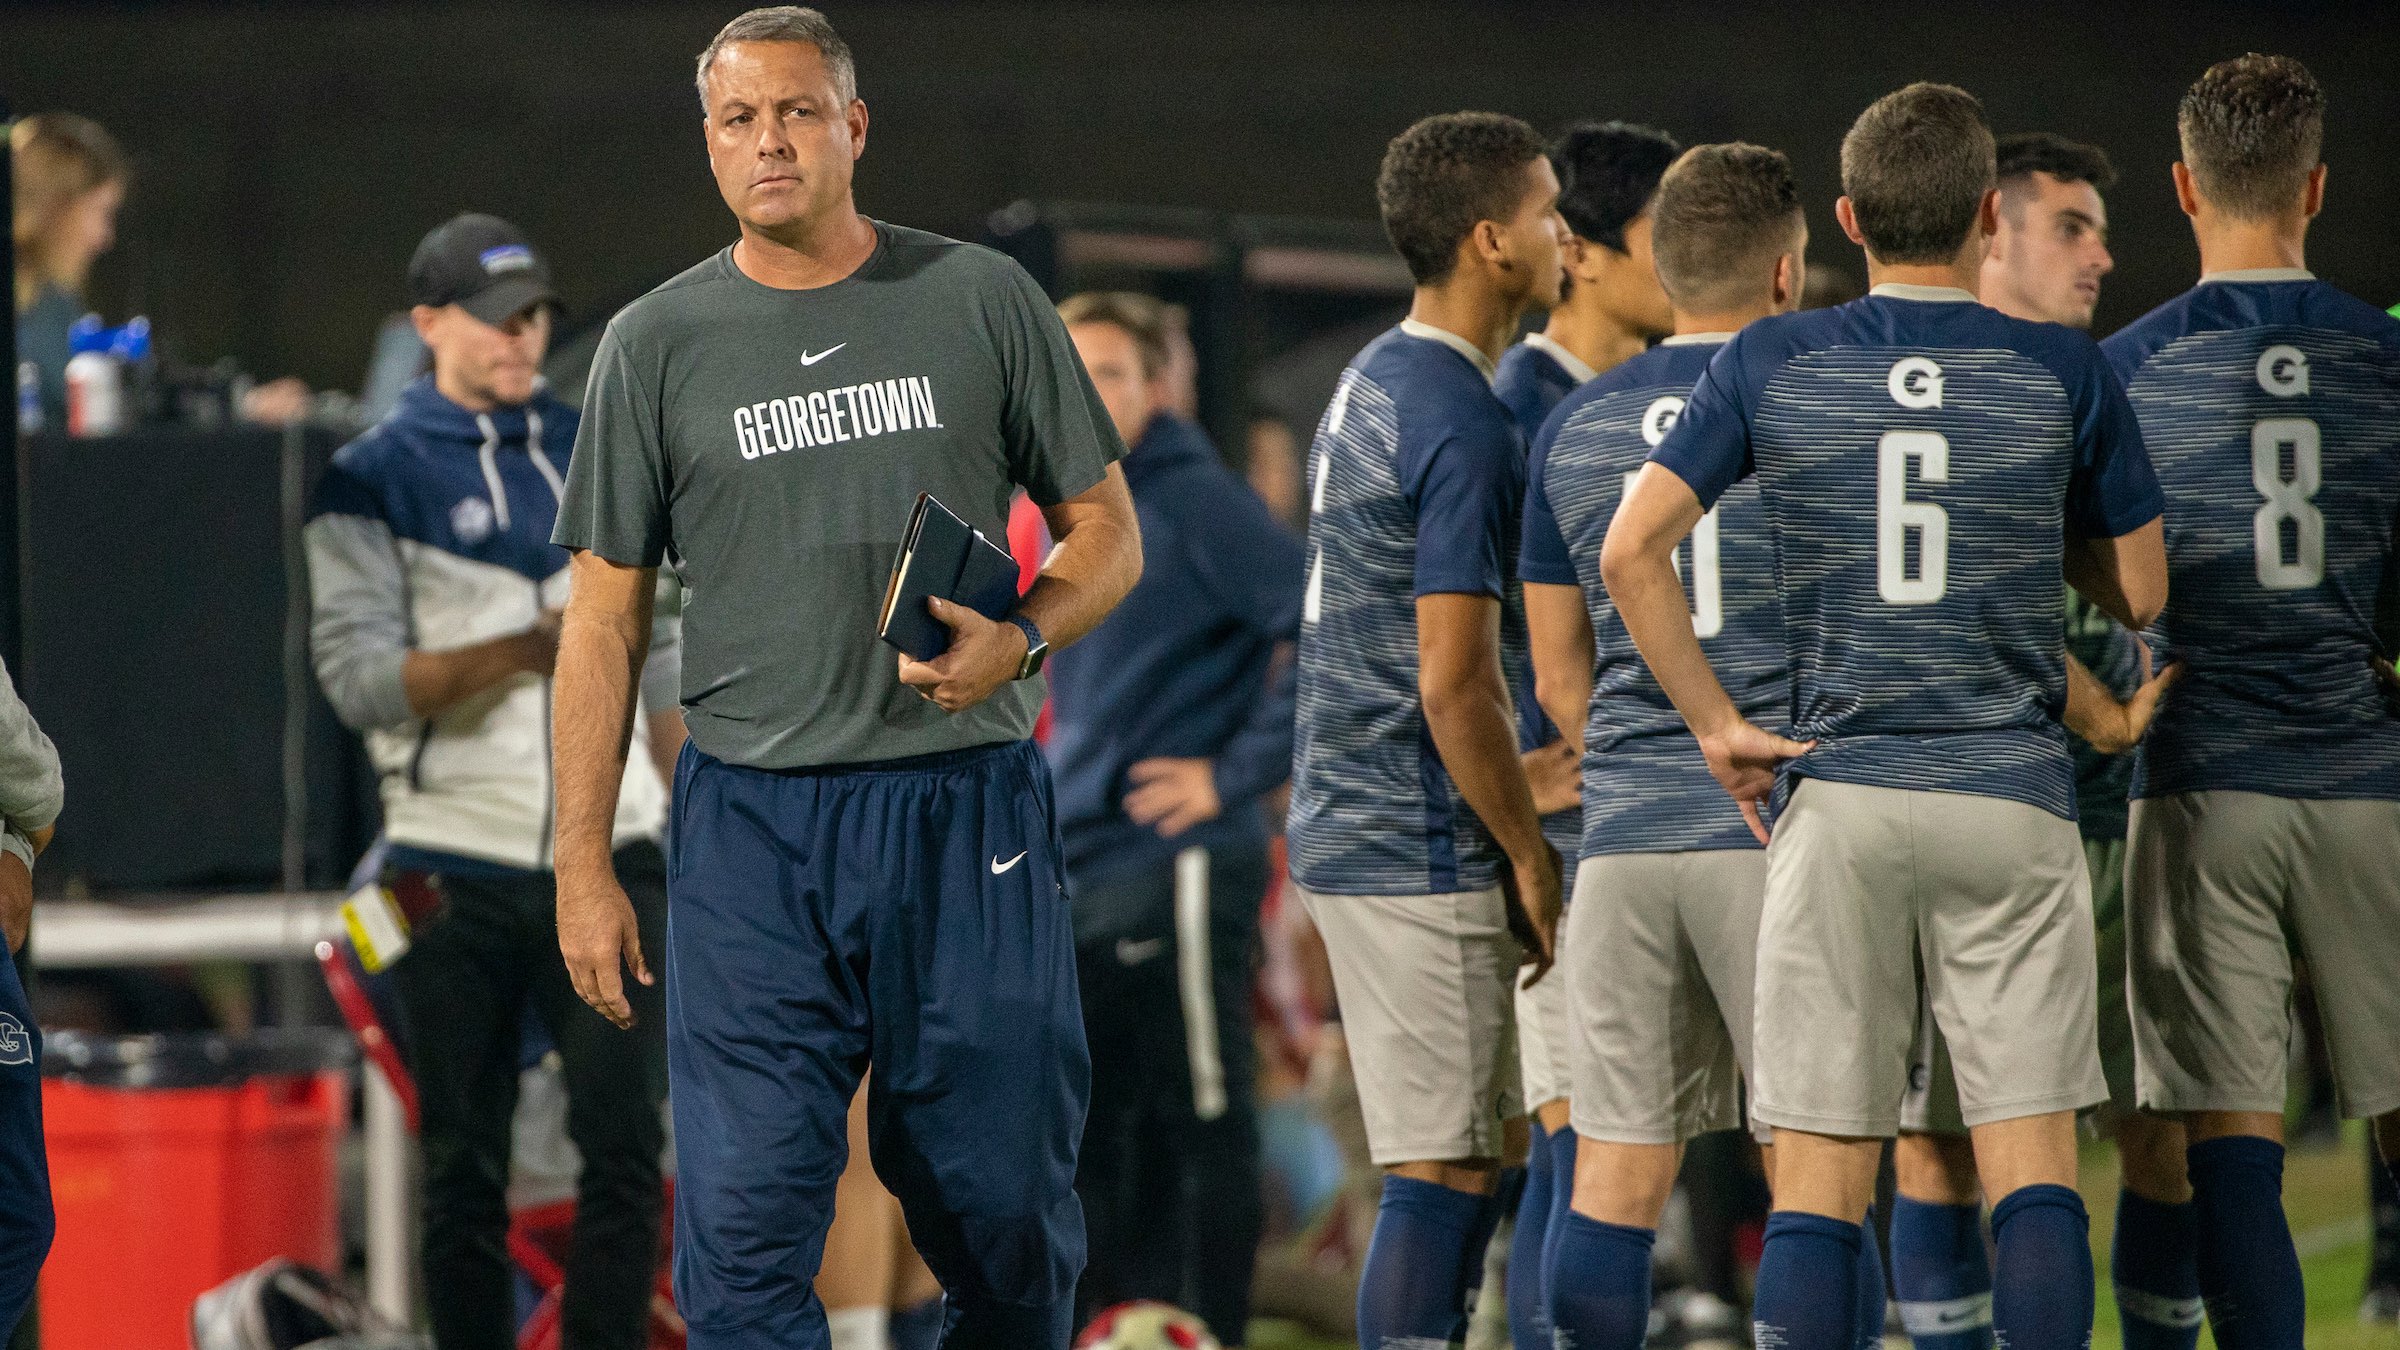 Georgetown men's soccer program signs eight incoming recruits - SoccerWire